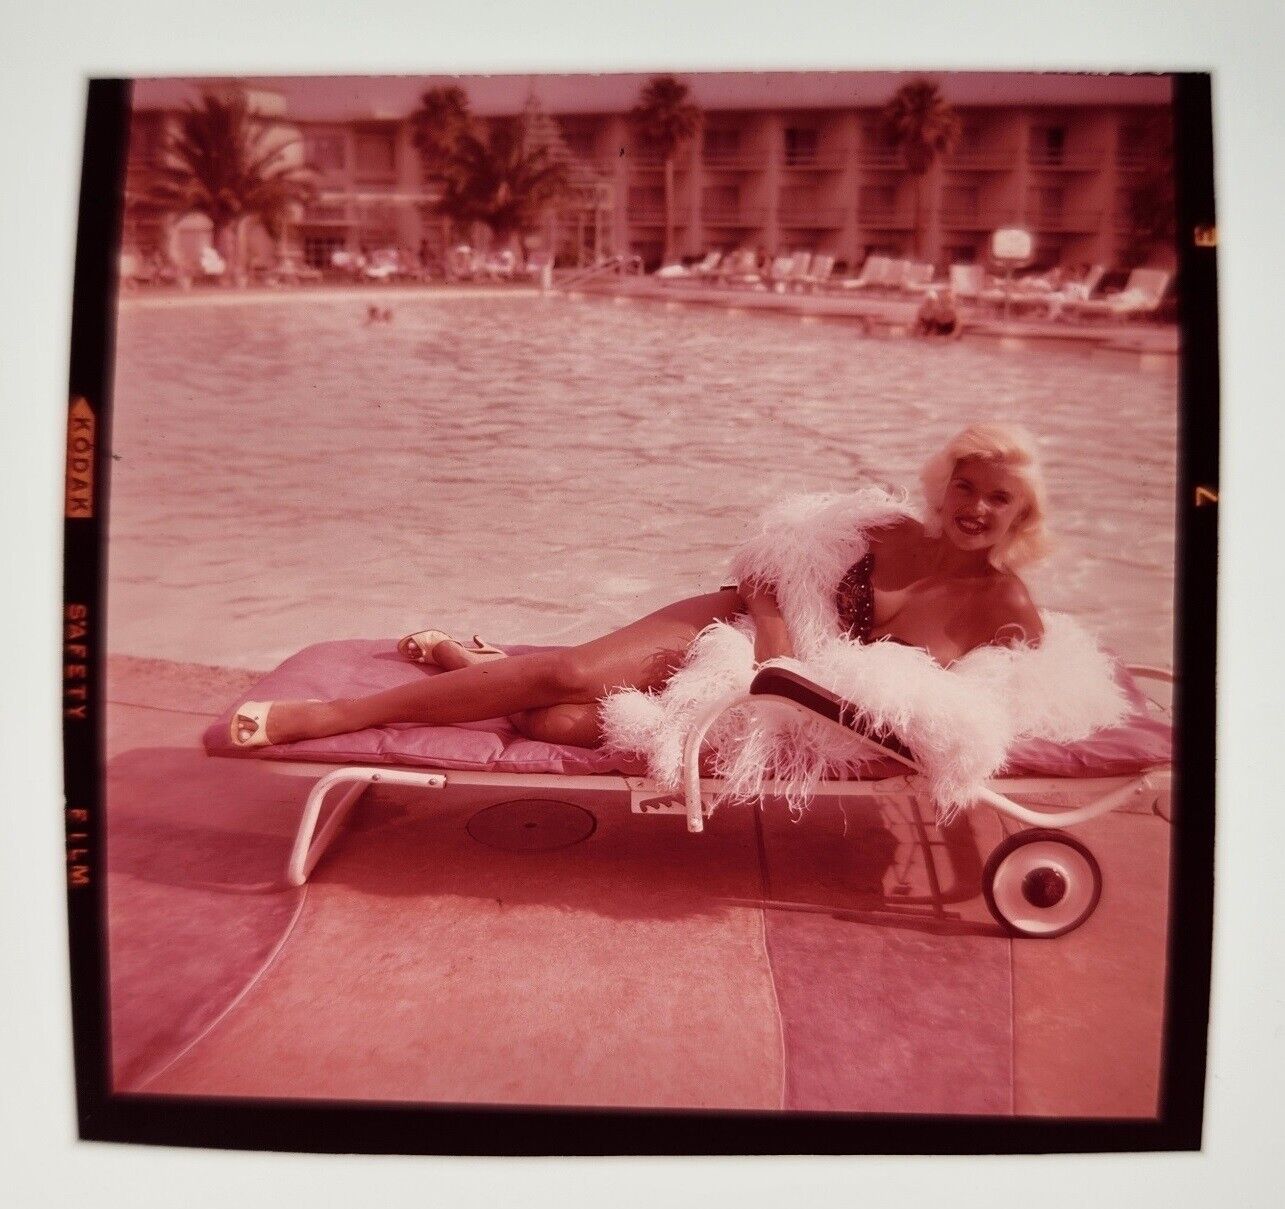 JAYNE MANSFIELD BY THE POOL - VINTAGE 2 1/4 COLOR TRANSPARENCY - RARE